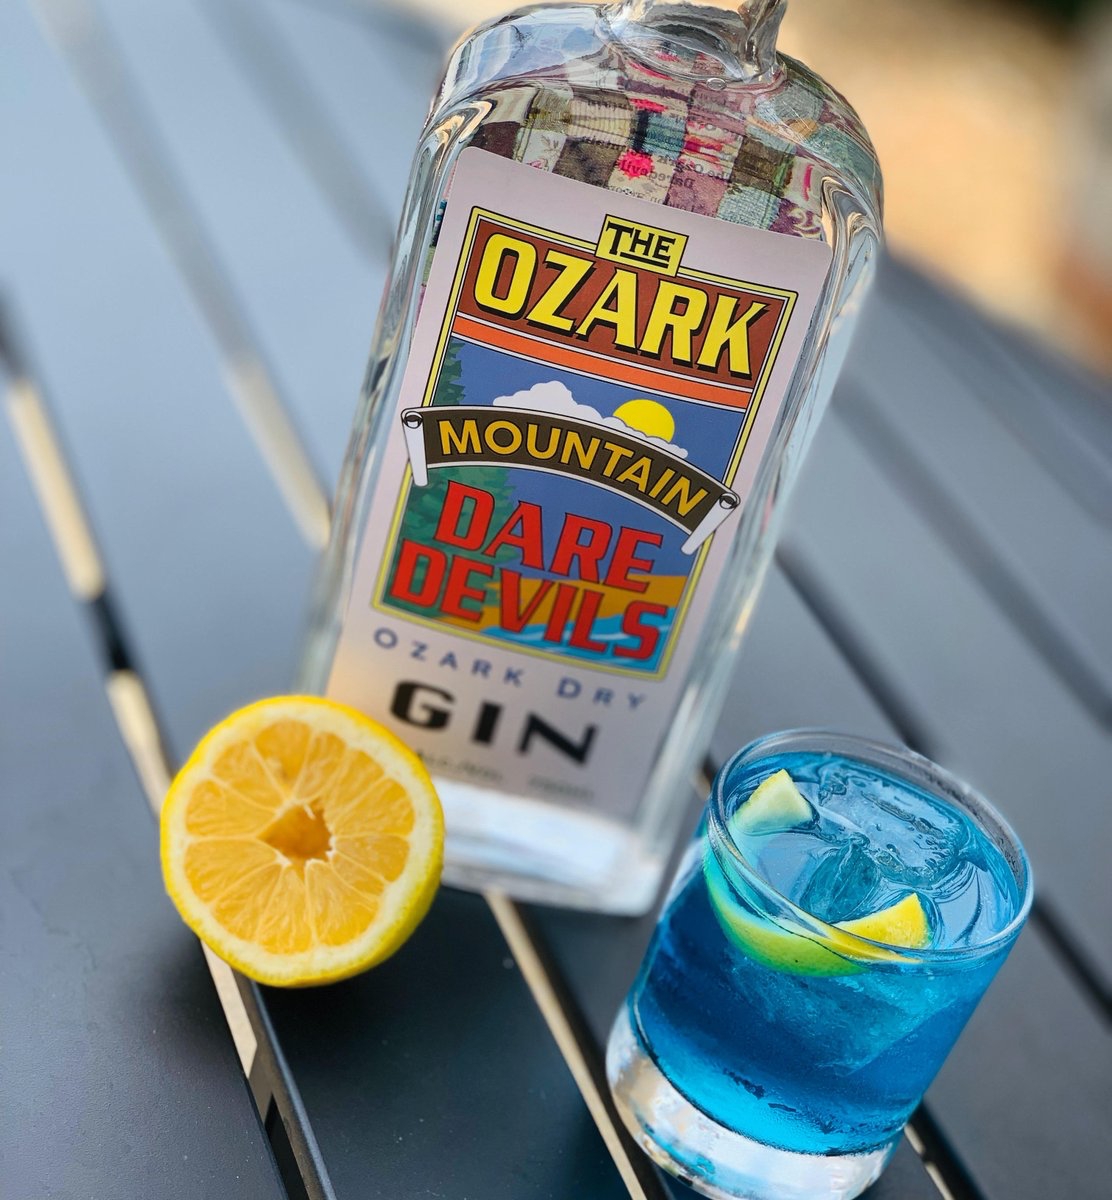 A bottle of The Ozark Mountain Daredevils Ozark Dry Gin sits on a table next to an orange half and a glass with a blue cocktail inside.